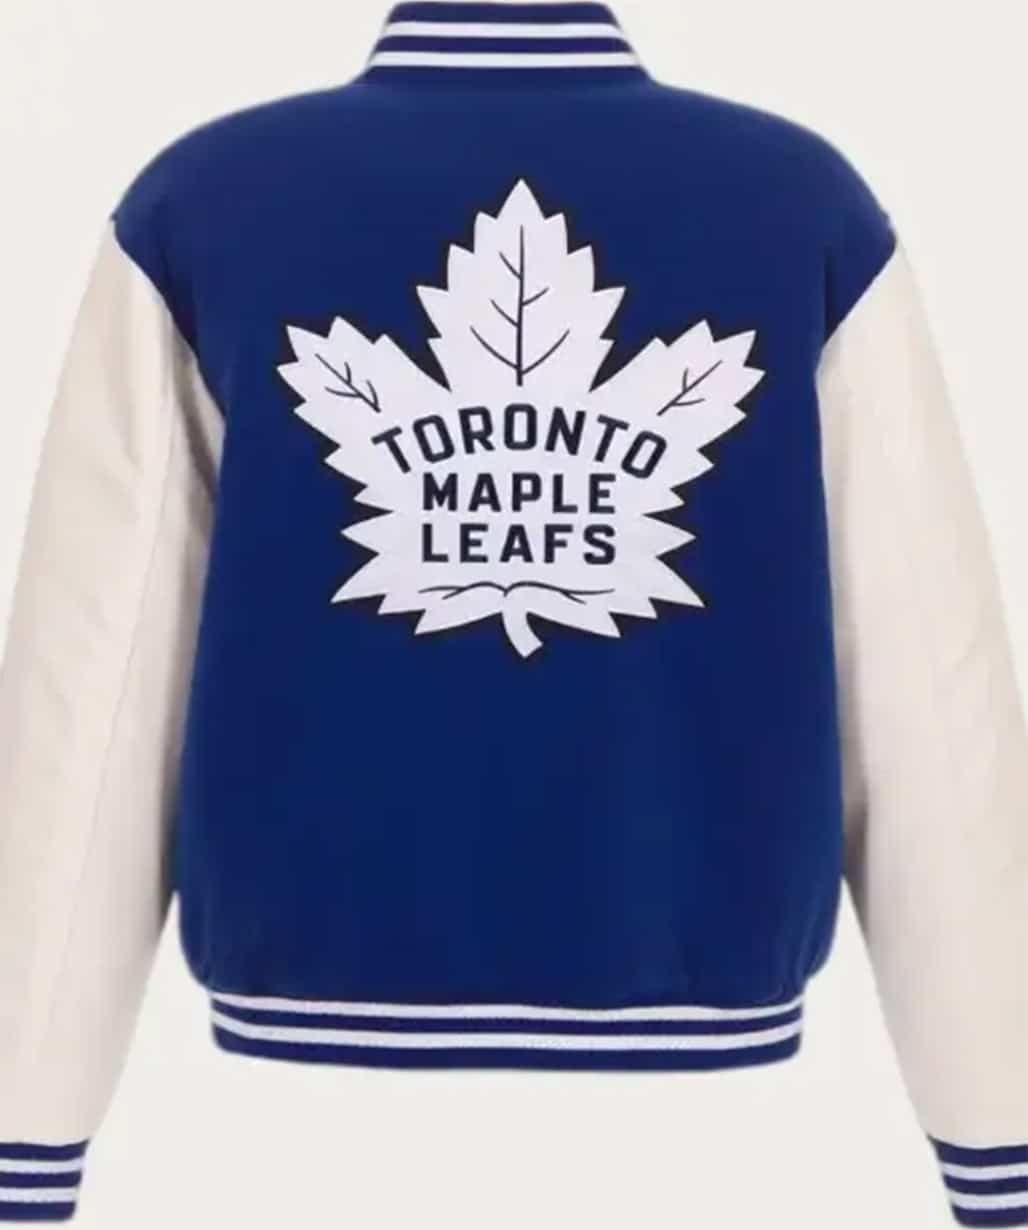 toronto-maple-leafs-bomber-jacket-men-outfit